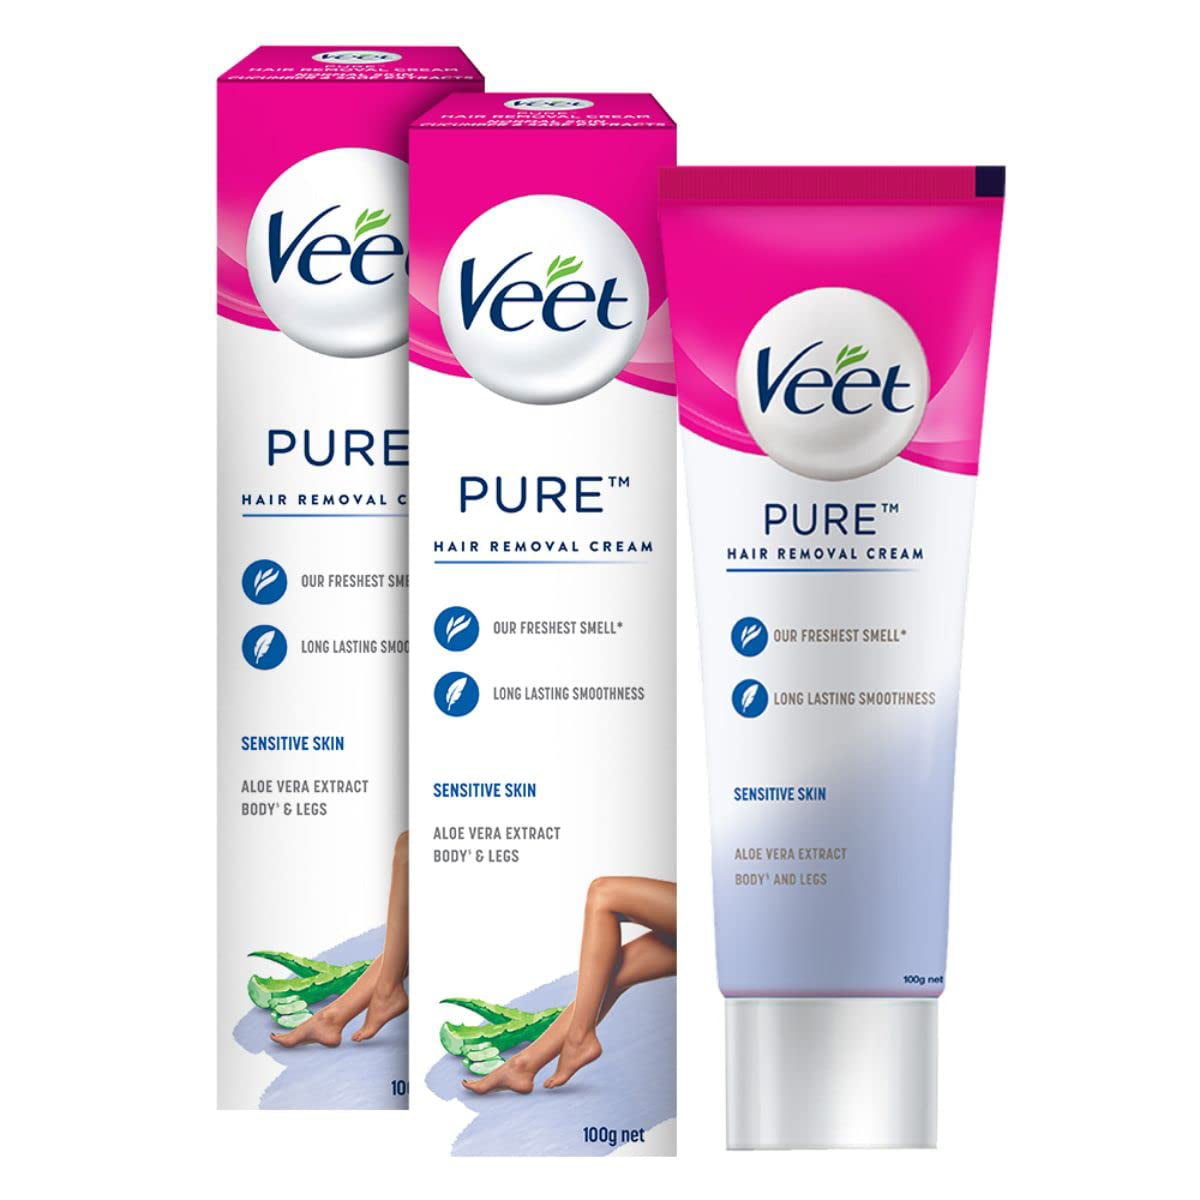 Veet Pure Hair Removal Cream for Women with No Ammonia Smell, Sensitive  Skin - 100 g (Pack of 2) | Suitable for Legs, Underarms, Bikini Line, Arms  | 2x Longer Lasting Smoothness than Razors 